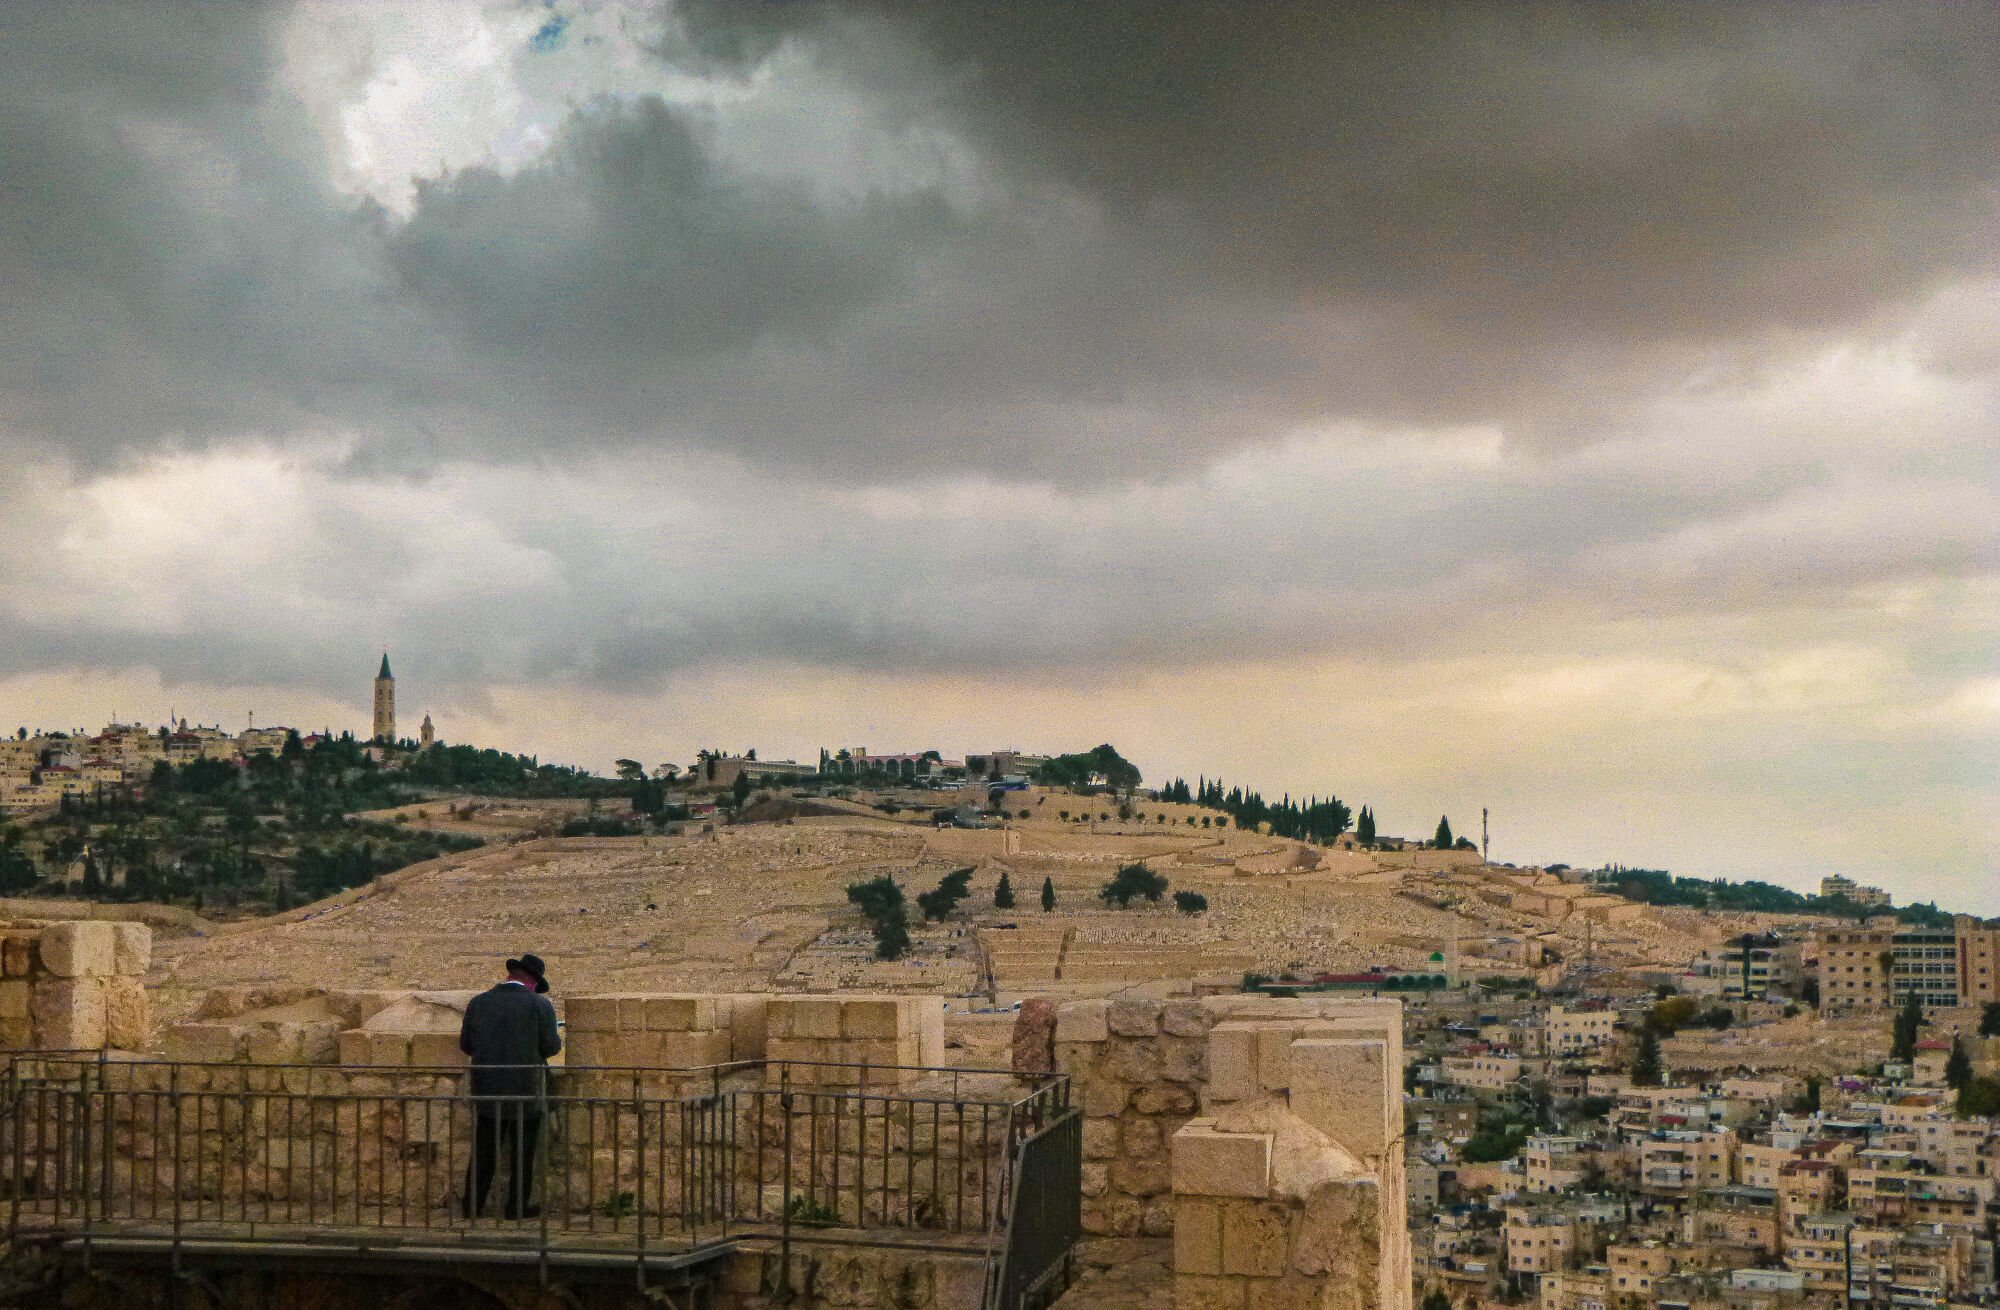 The wall of Jerusalem - top historical place to visit in Israel